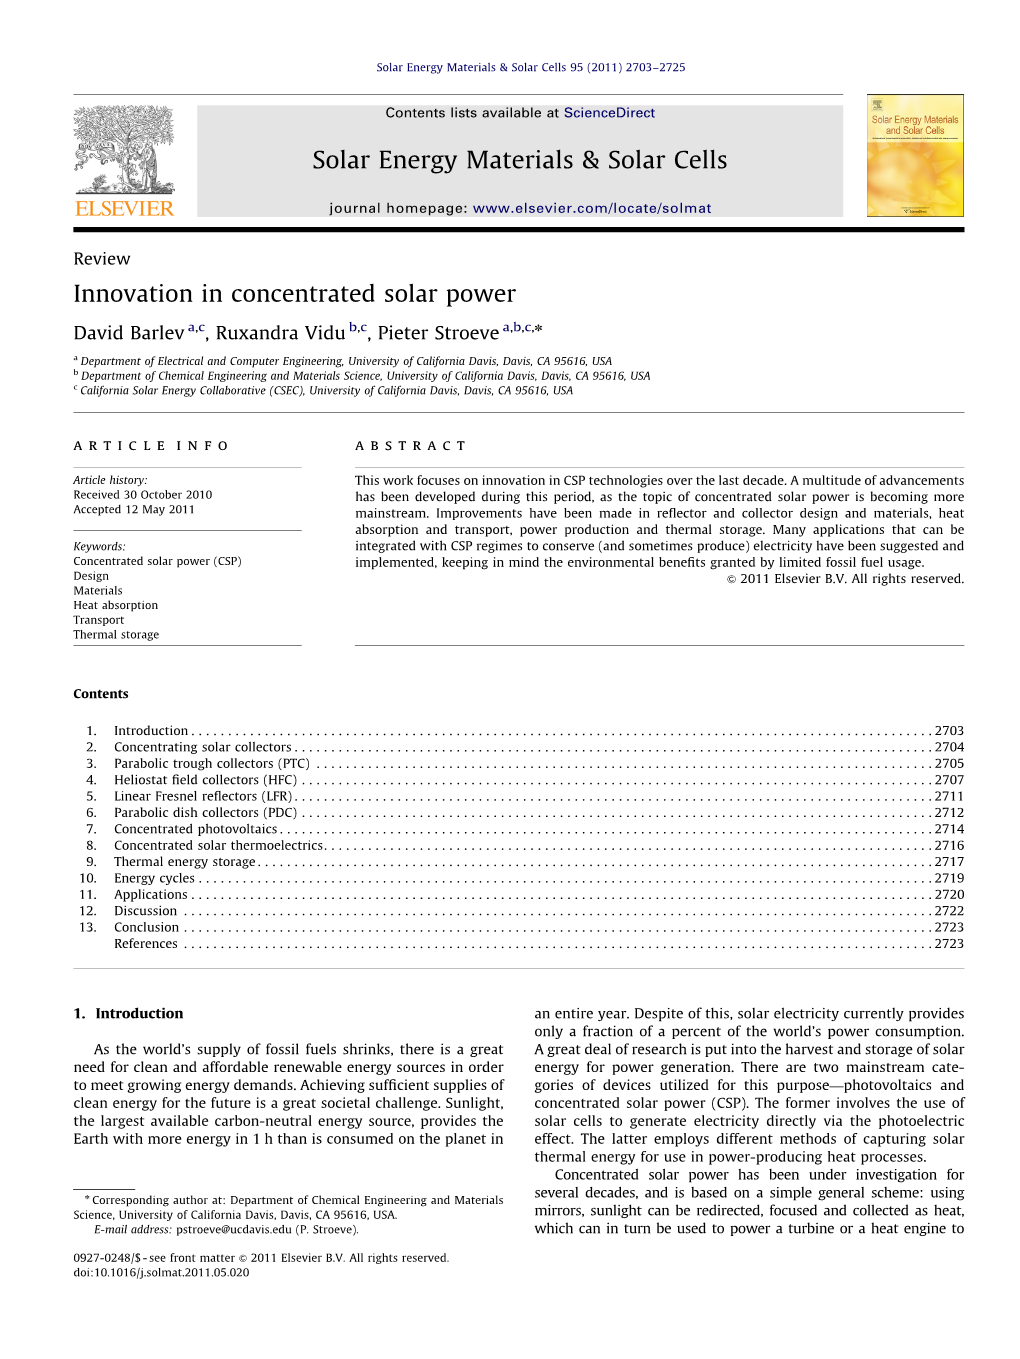 Innovation in Concentrated Solar Power.Pdf